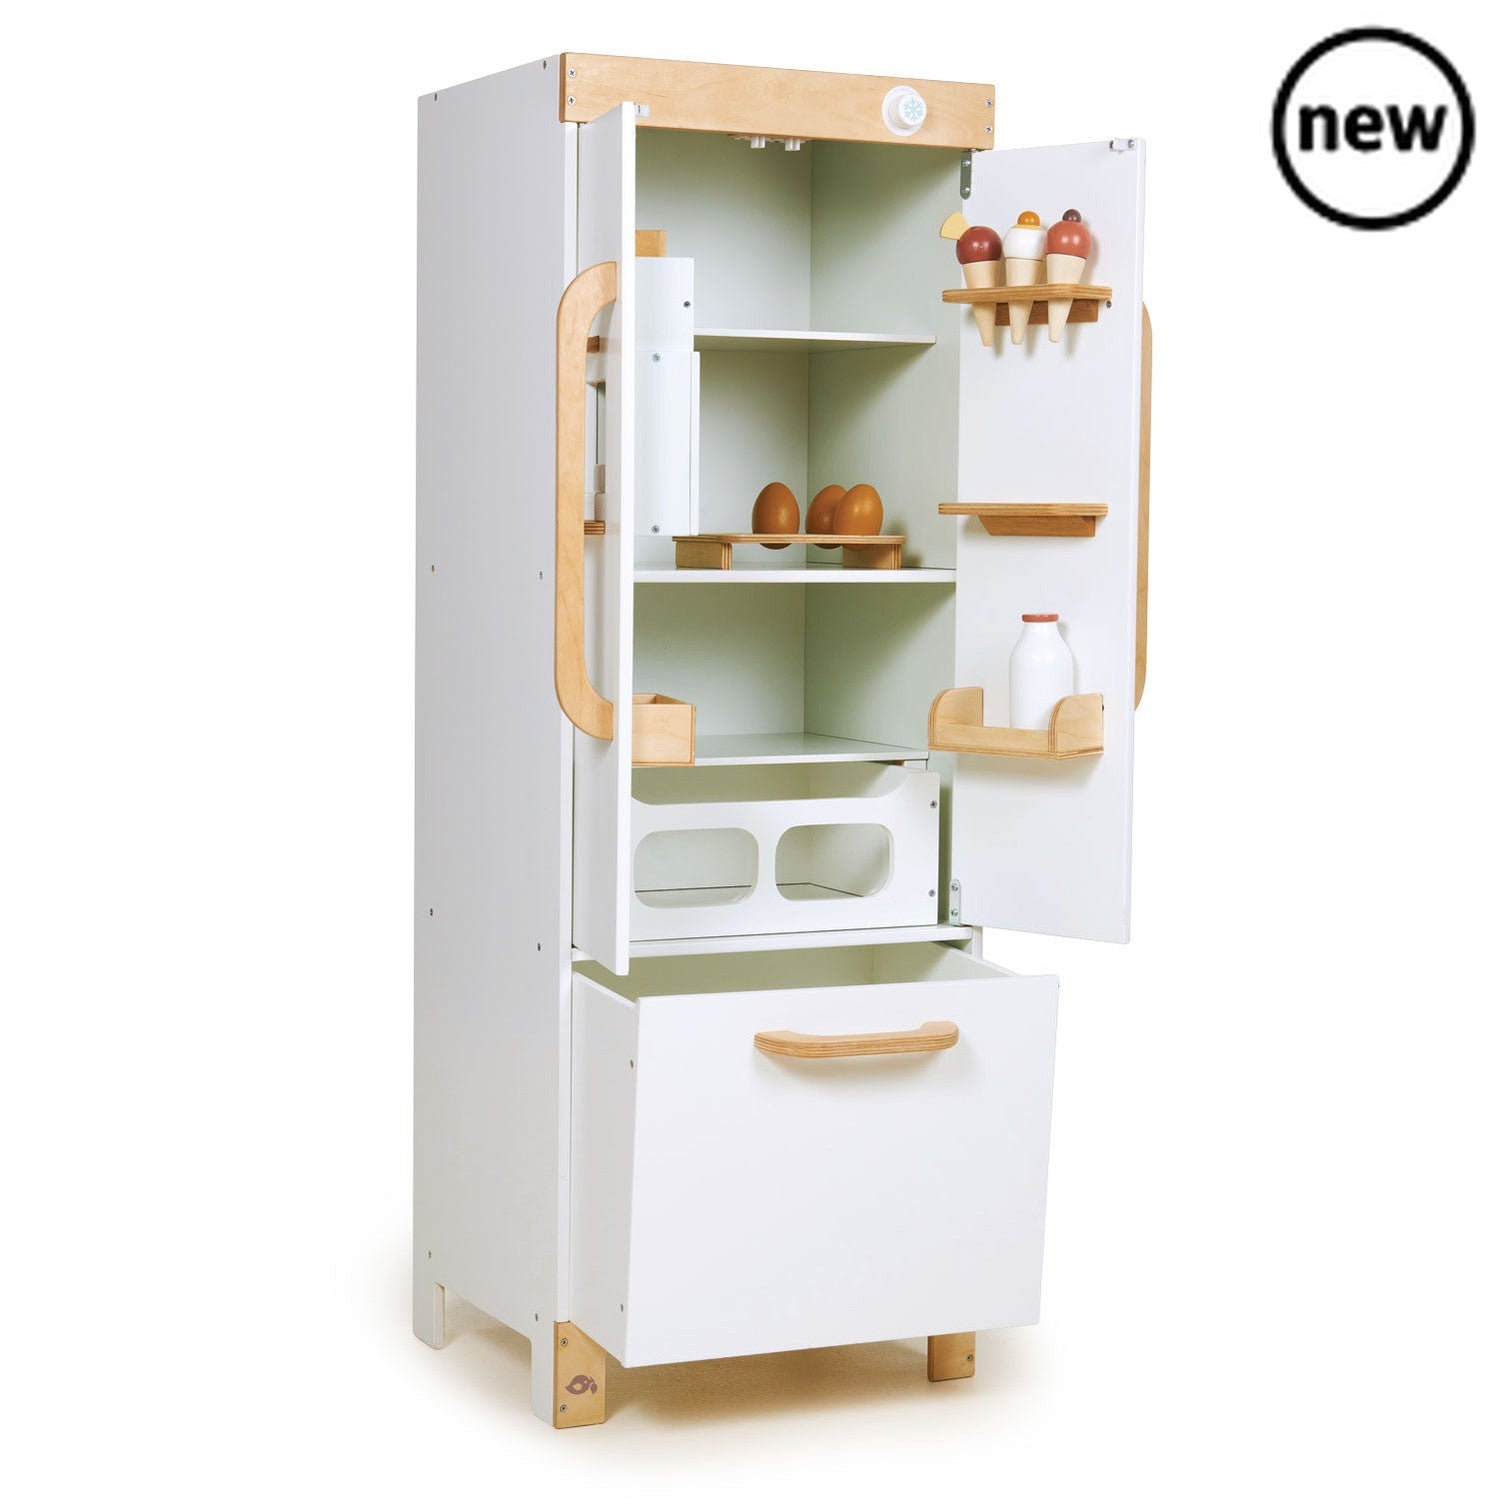 Tenderleaf Toys Wooden Refrigerator, Need somewhere to chill your ice-creams? A stand-alone white fridge-freezer makes a great addition to our La Fiamma Grand Kitchen. This stylish fridge has a real wow factor with a unique functioning ice cube dispenser which drops ice cubes with the press of a button. Comes with: 3 ice cream cornets 3 brown eggs on an egg stand a bottle of milk and two magnets! Great for role play and creative play! Product size: 1.081x0.386x0.09meters (HxWxD) Suitable for ages 3+, Tender